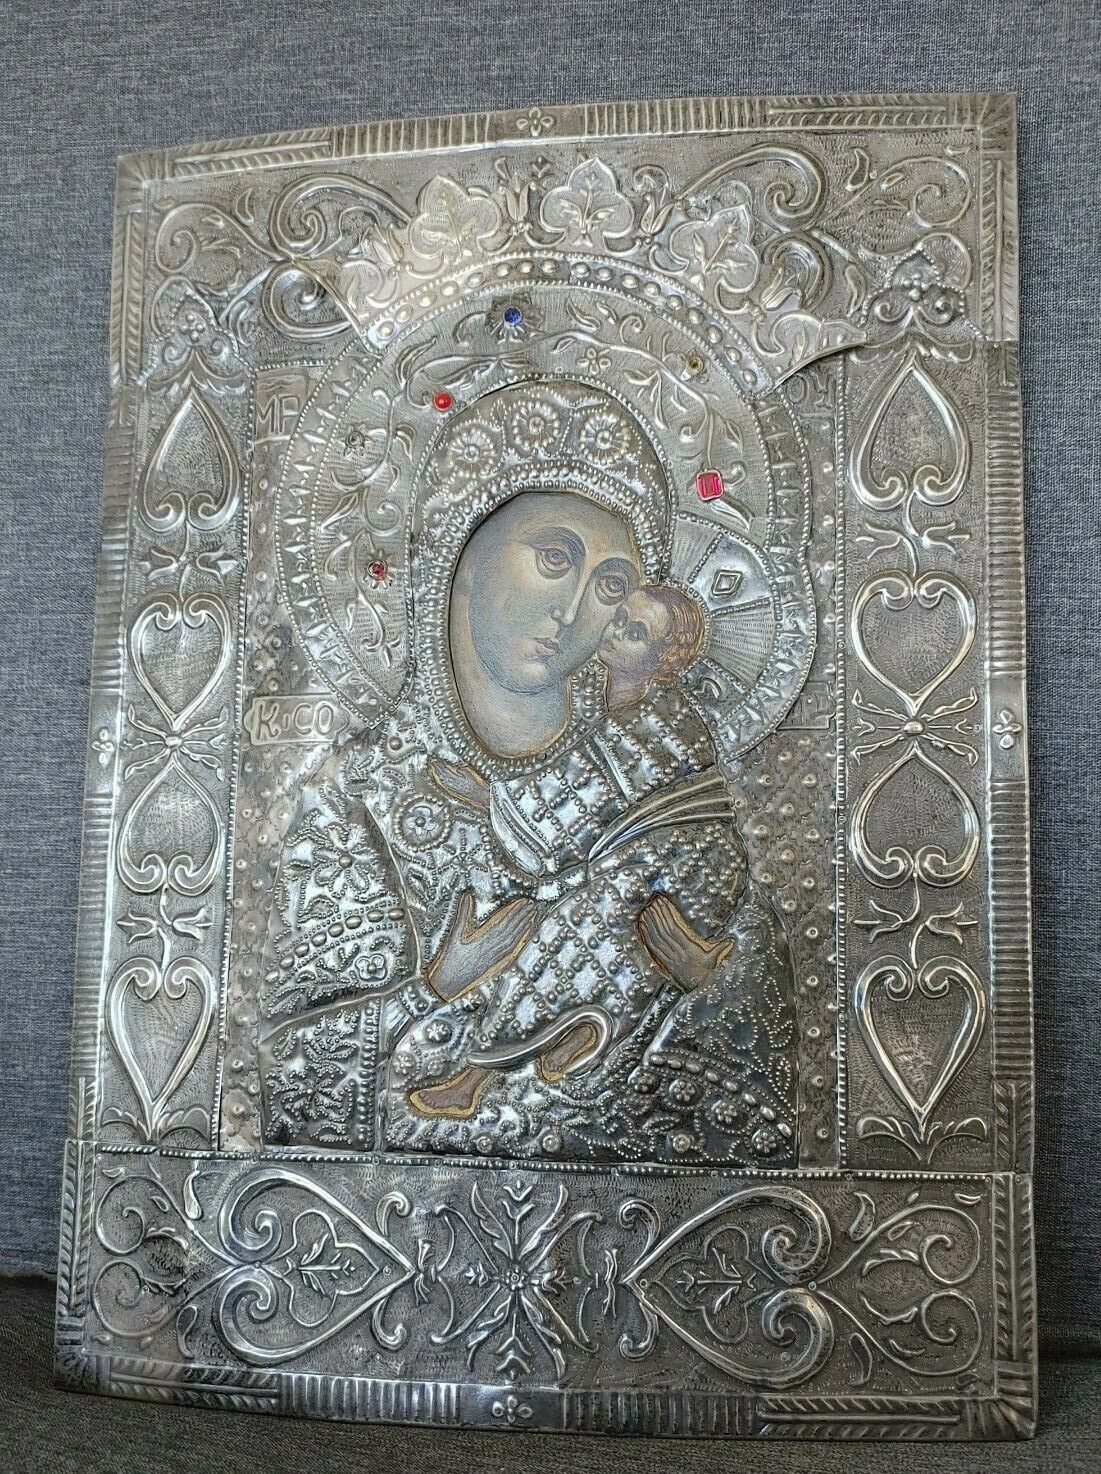 X LARGE ANTIQUE JEWELED RUSSIAN STYLE GREEK 900 SILVER ICON RIZZA 40 X 30 CM 